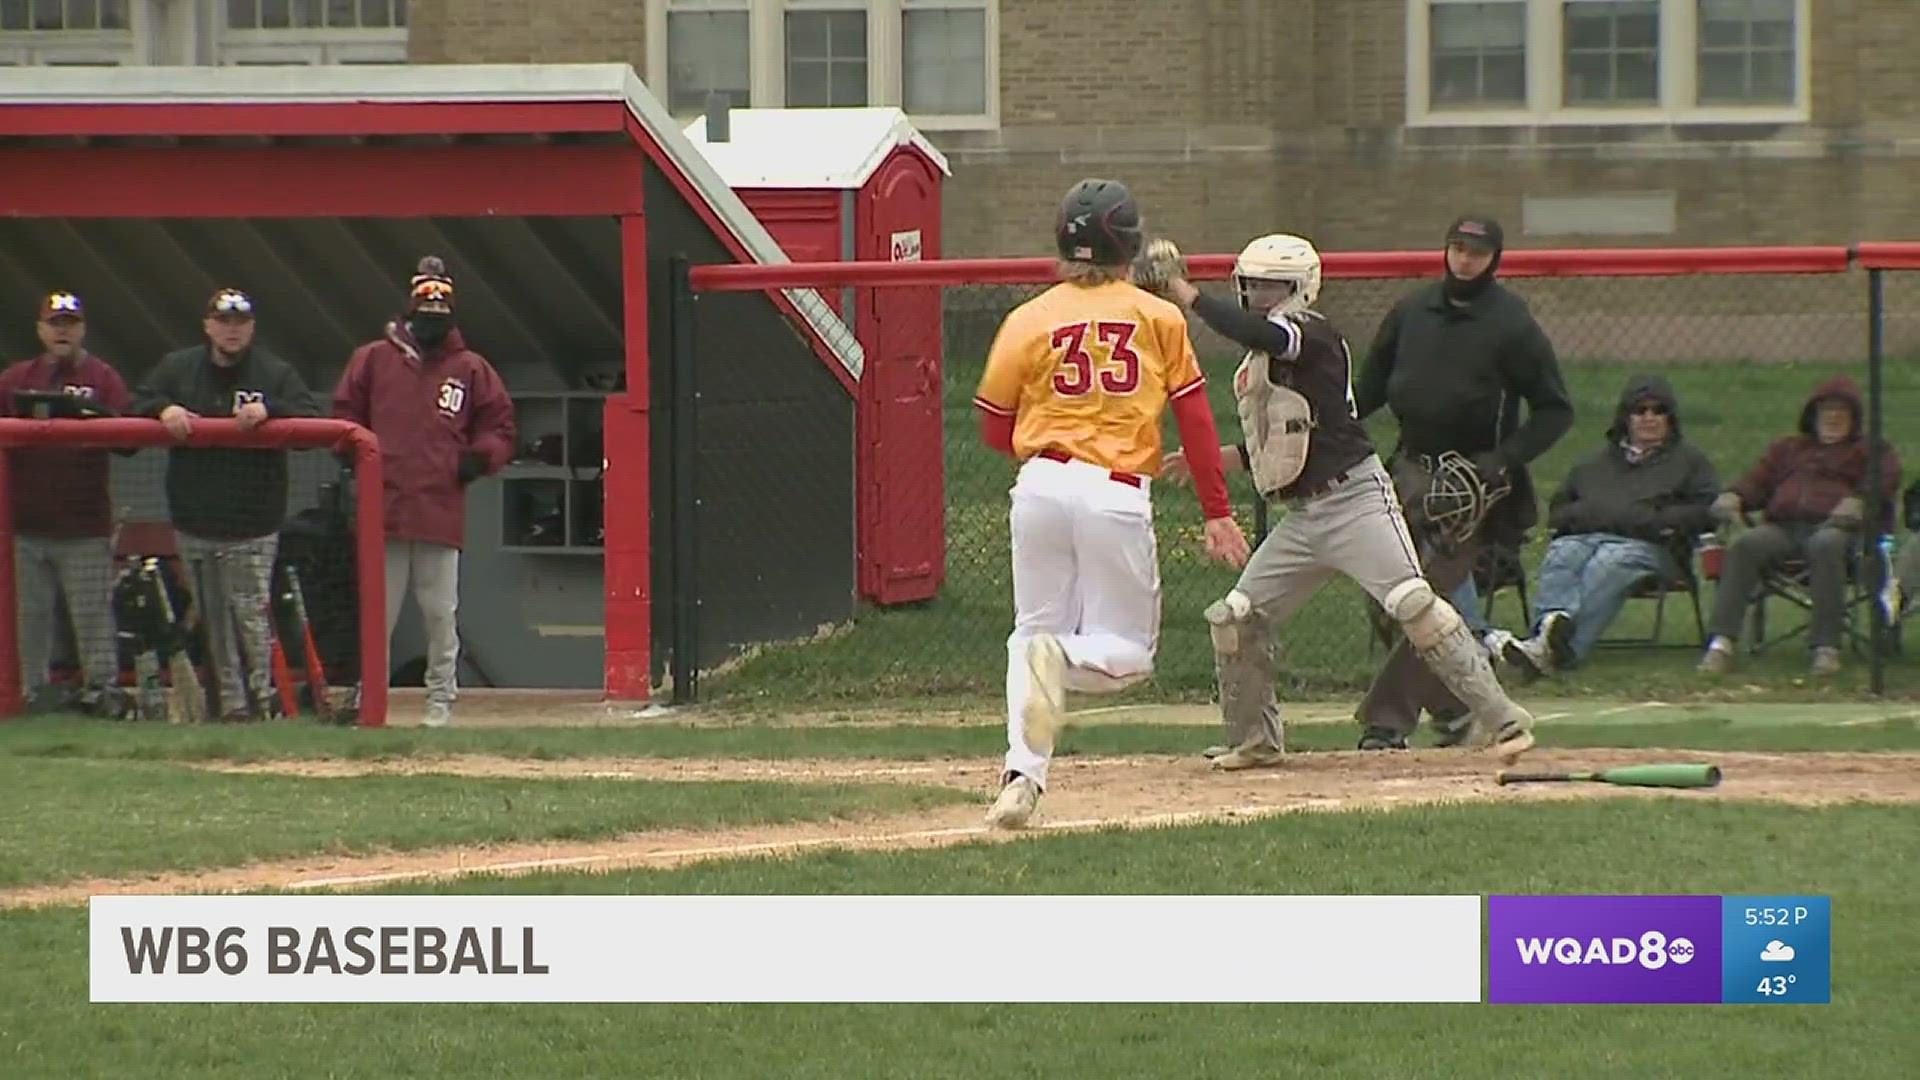 During game one the Maroons pulled ahead with a three-run lead, with Rock Island only getting one run in the bottom of the sixth inning.